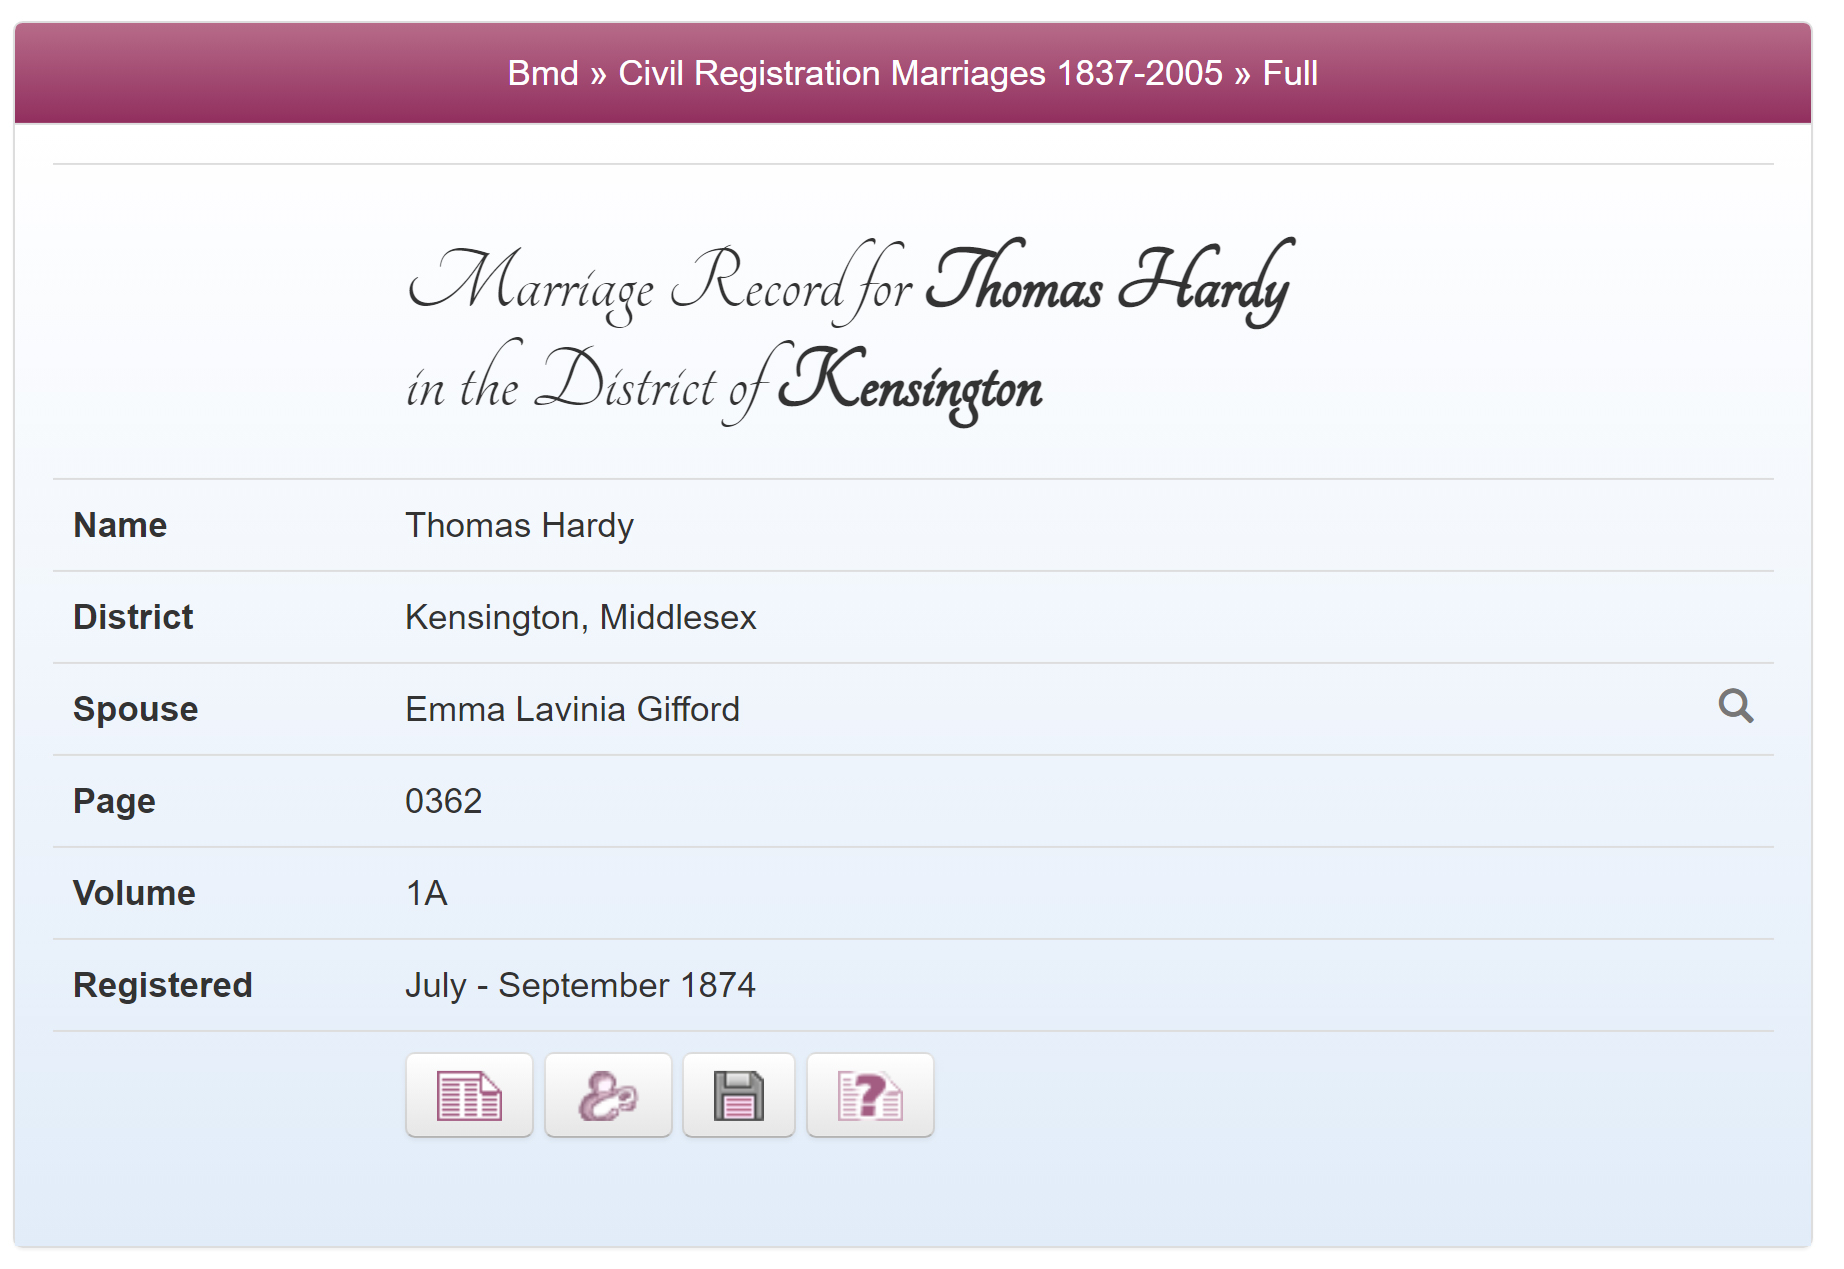 Using the 1911 Marriage Finder Tool to find Thomas Hardy's marriage